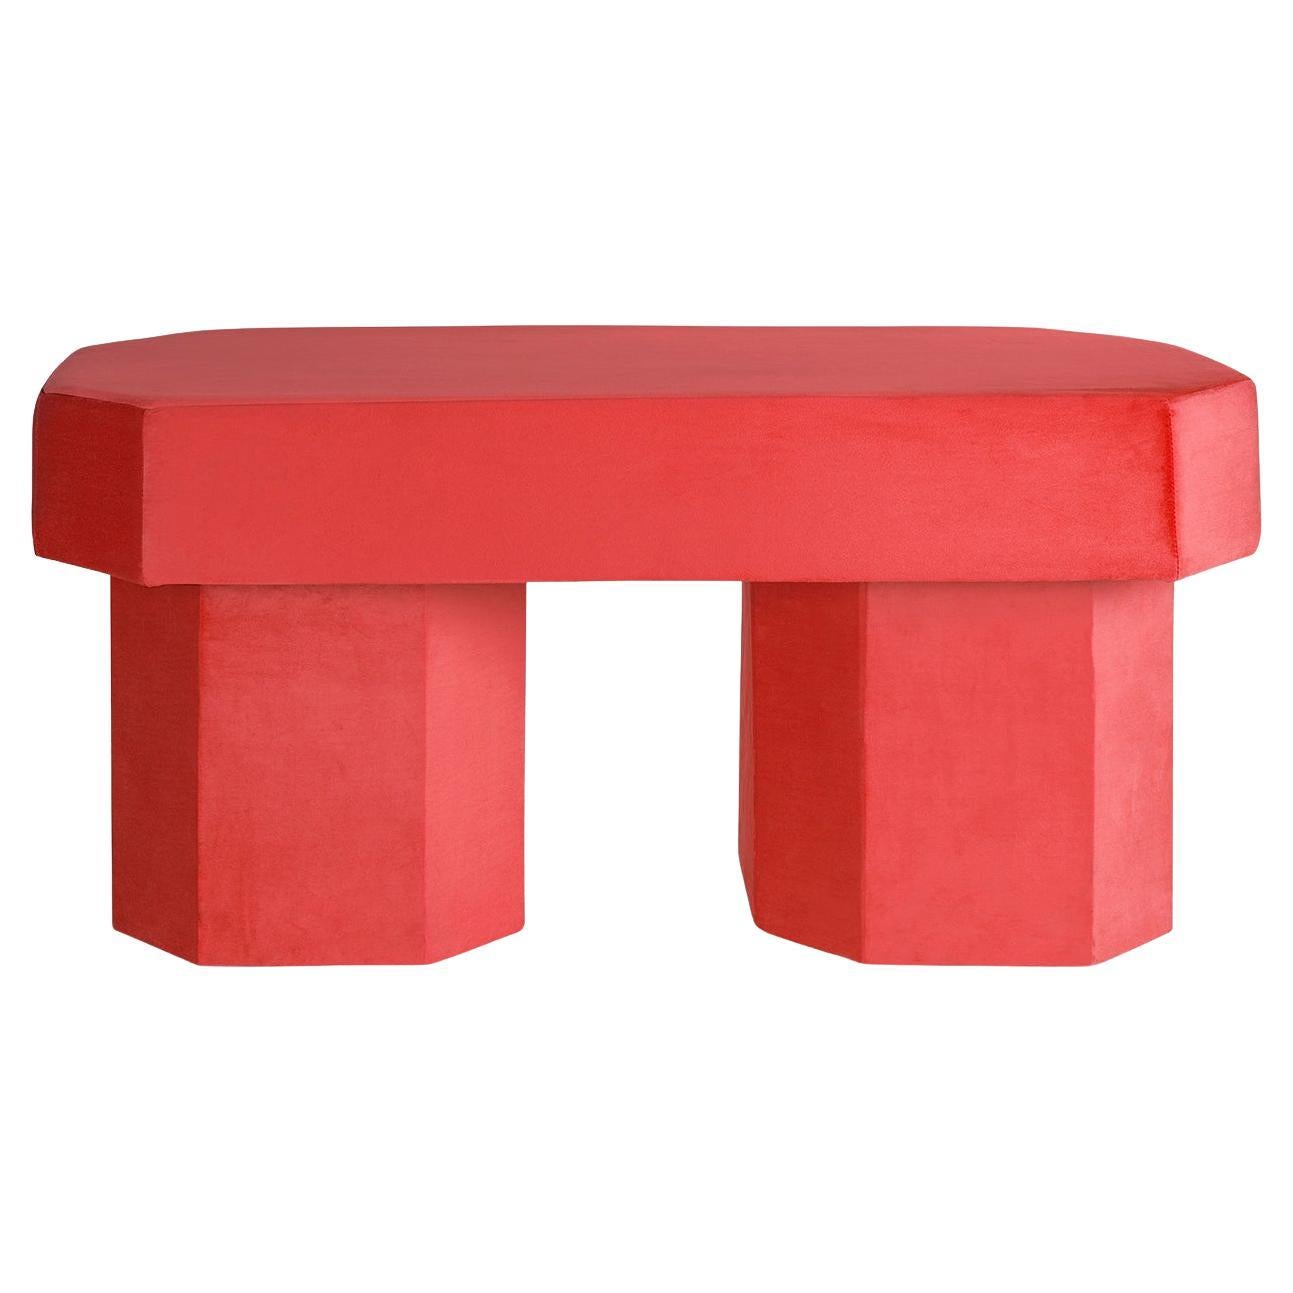 Viva Red Bench by Houtique For Sale